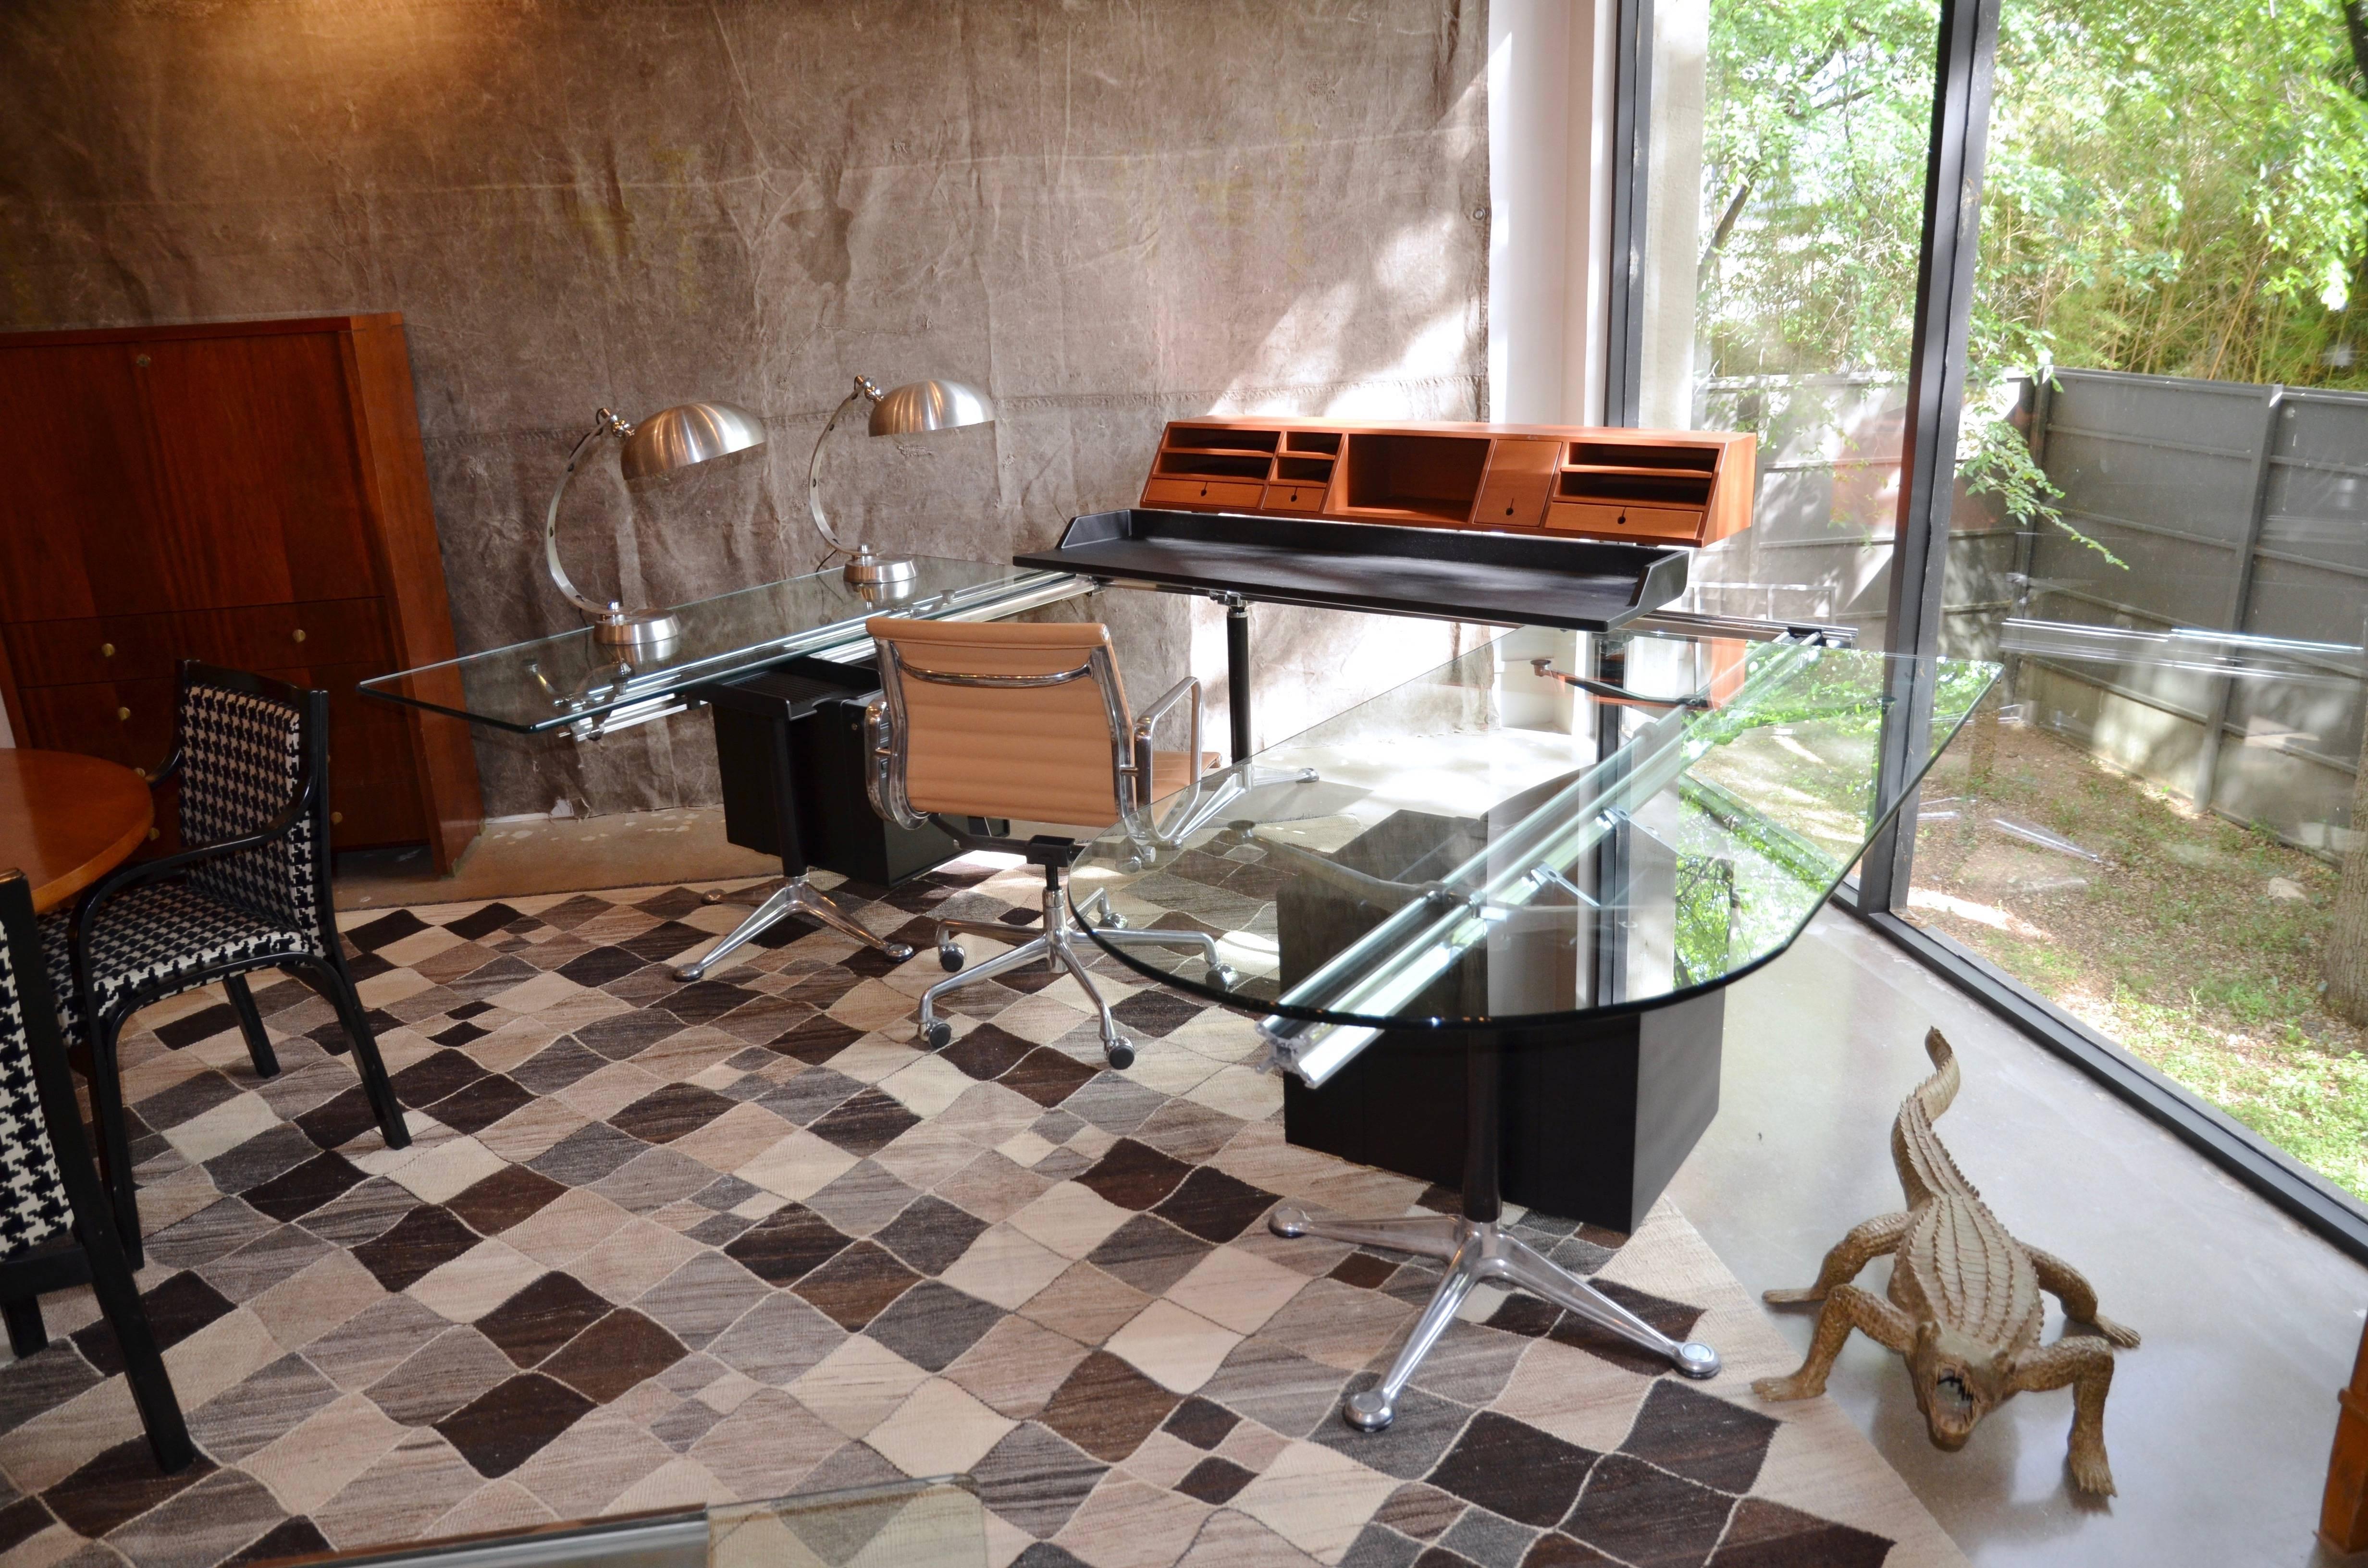 This highly innovative design by Bruce Burdick uses polished aluminum beams supported by legs with splayed cast aluminum feet to suspend glass, wood and heavy plastic composite components. This example has three work surfaces, large wood organizer,